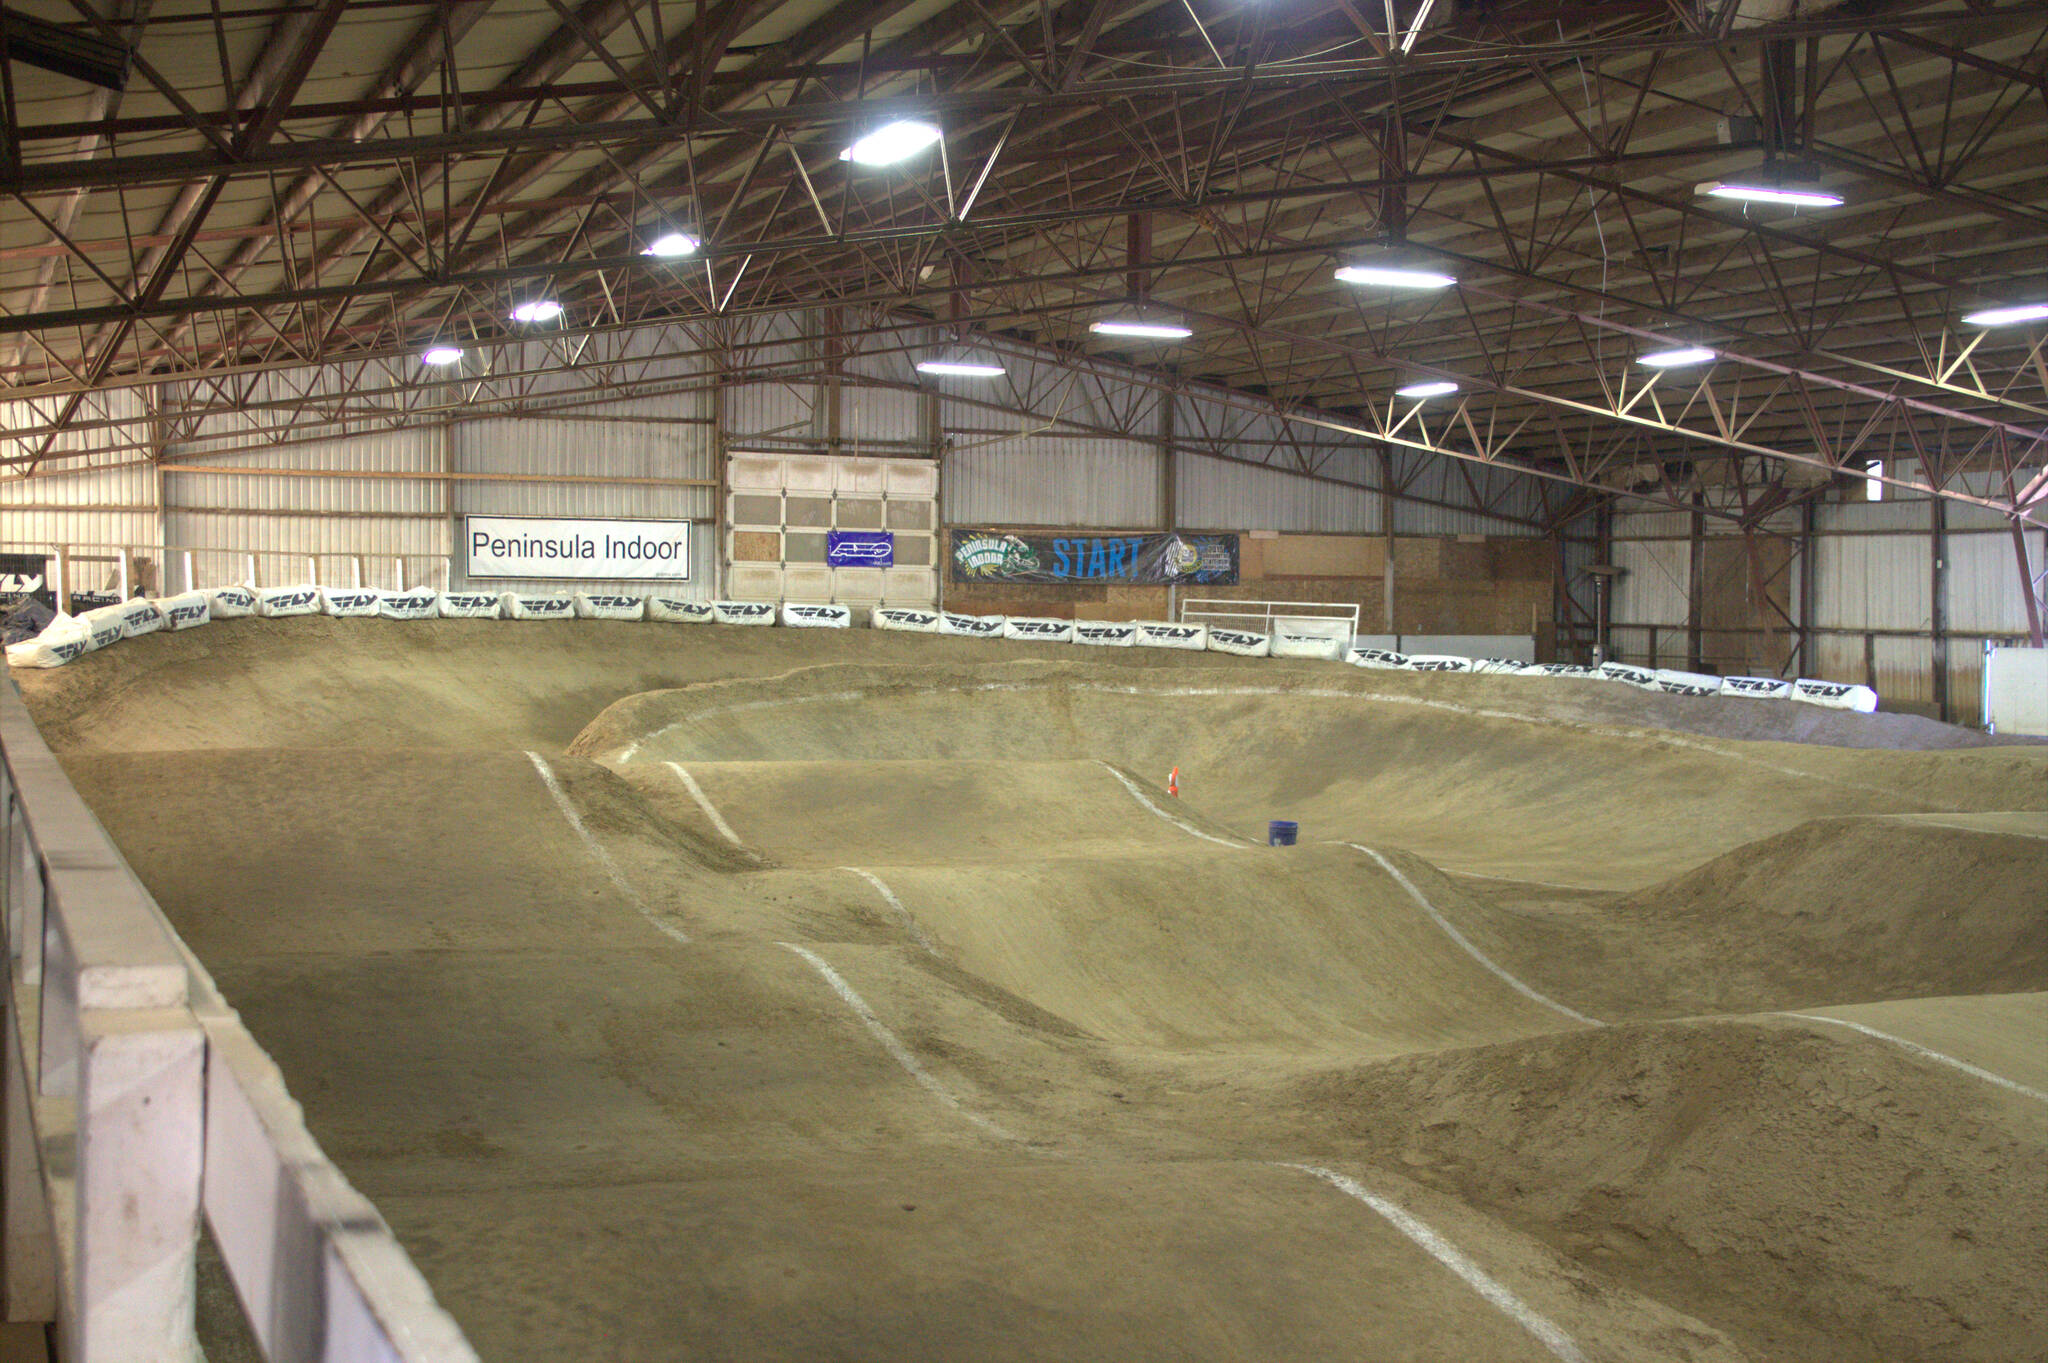 A shot of the layout of the track.